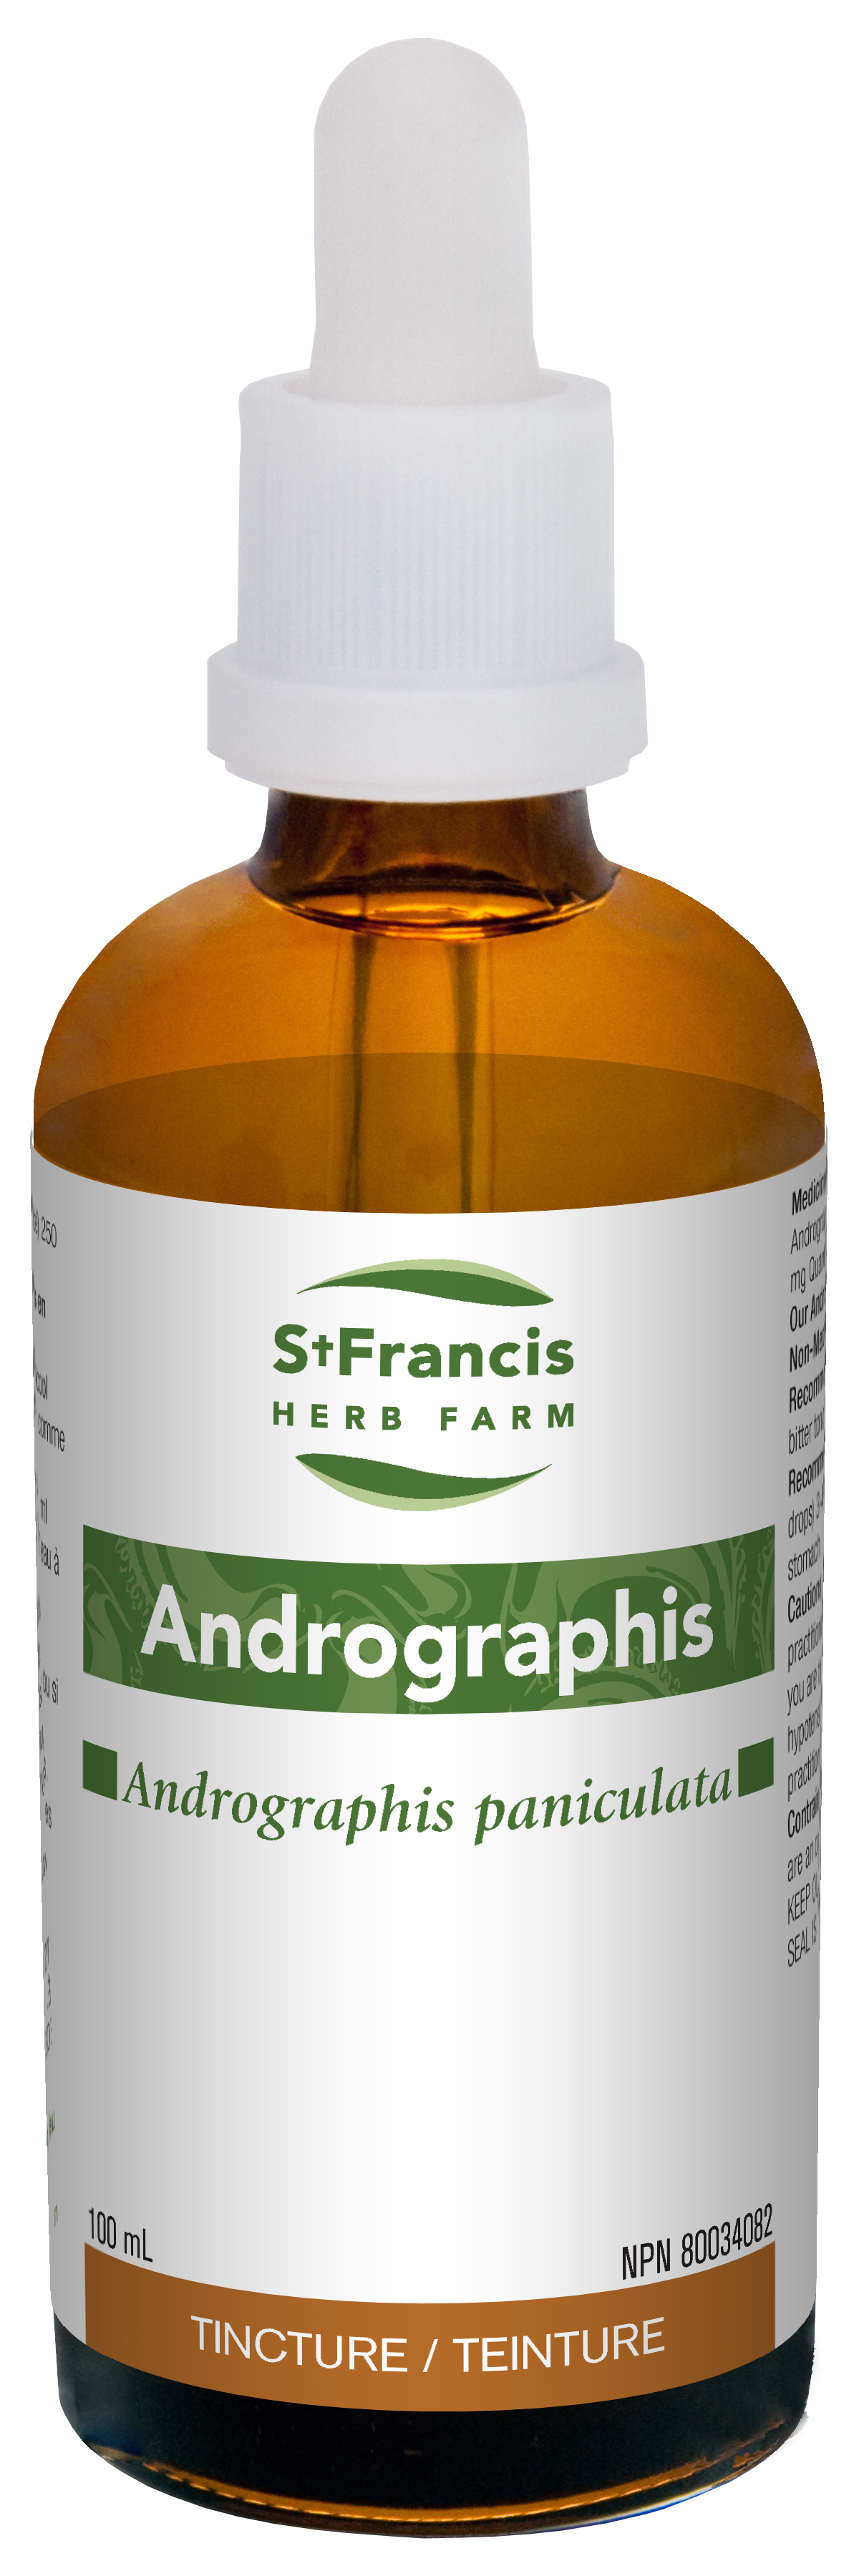 St. Francis Herb Farm - Andrographis - Single Herb Tincture